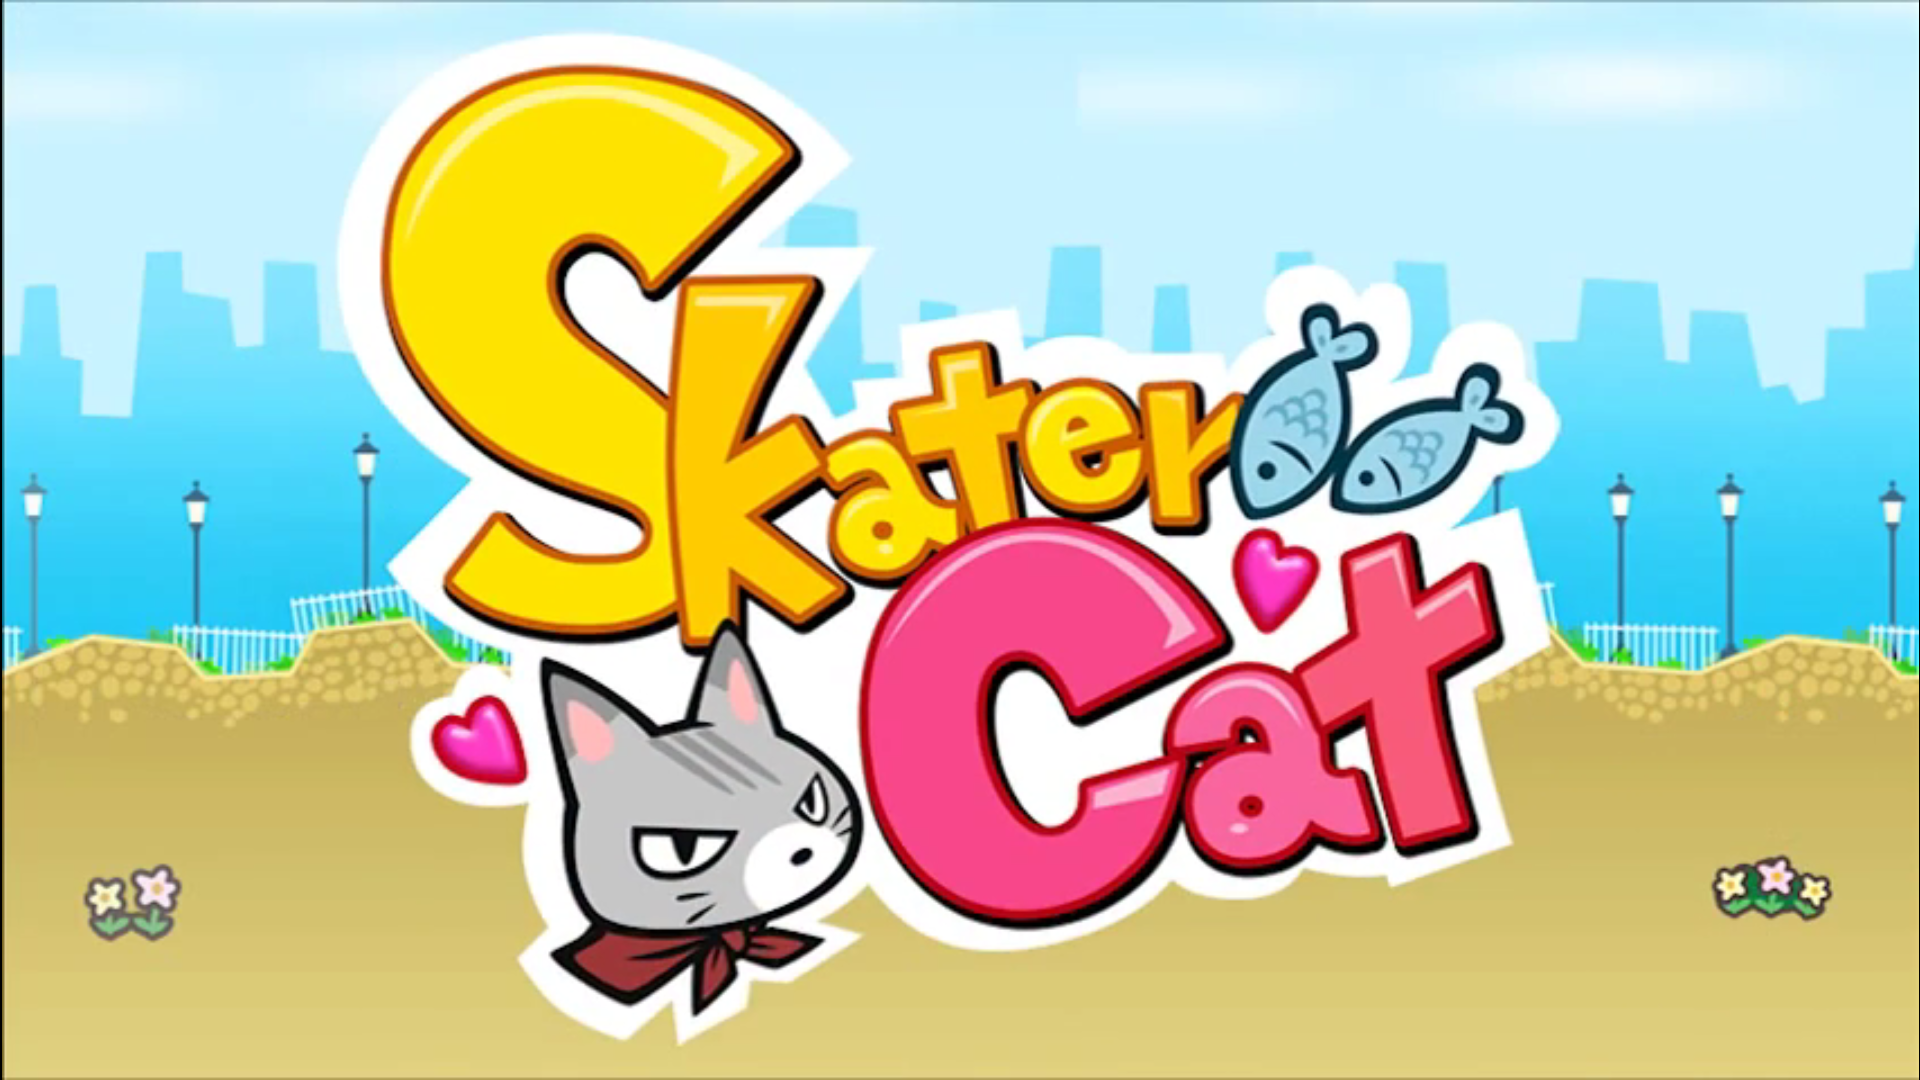 PR: The furriest four-wheel action game, Skater Cat is coming soon to Nintendo 3DS!